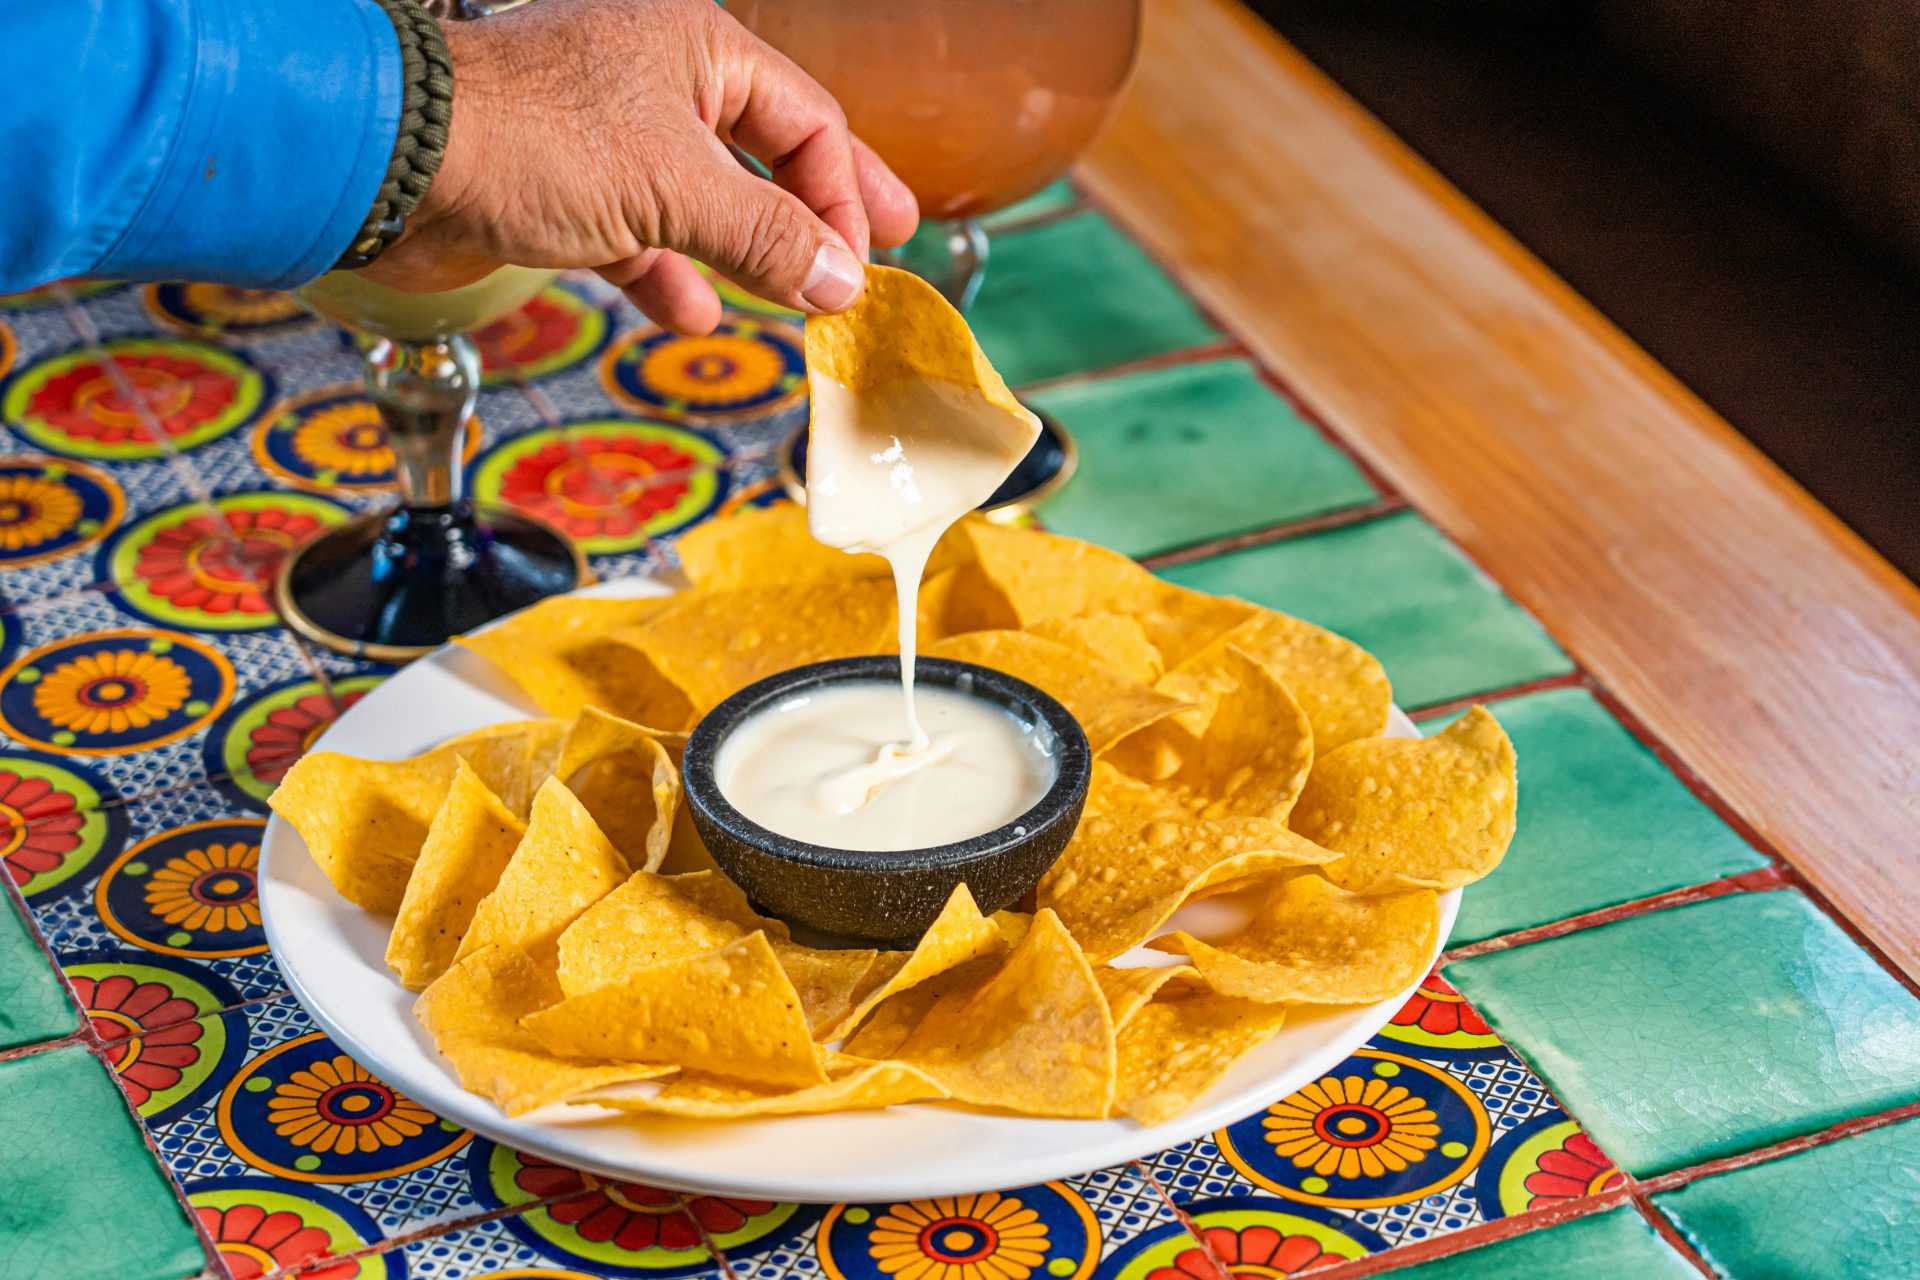 7. Chips & Queso 